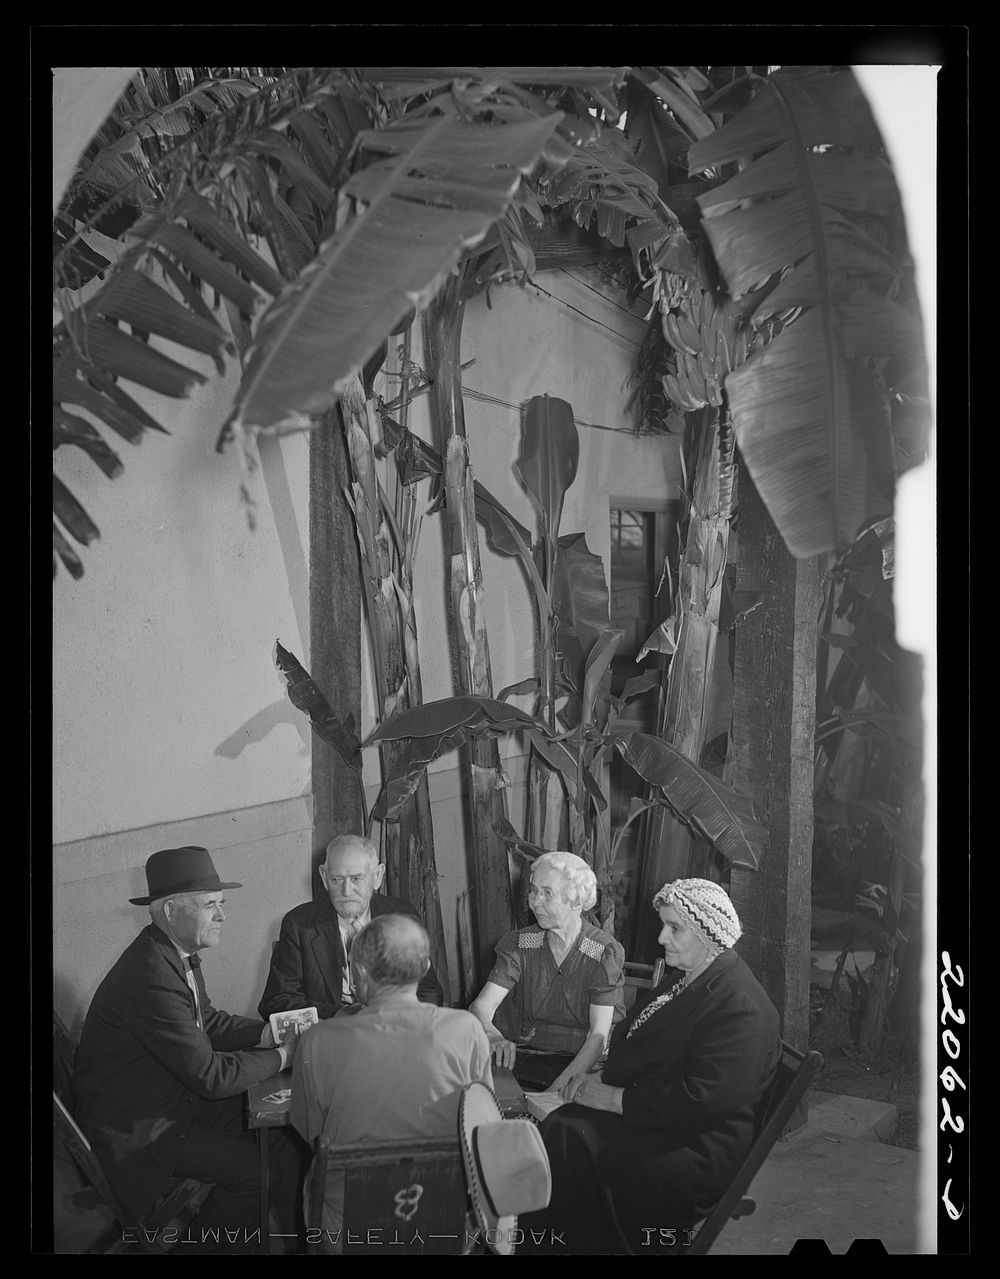 Brownsville, Texas. Winter tourists playing cards at the Chamber of Commerce building. Sourced from the Library of Congress.